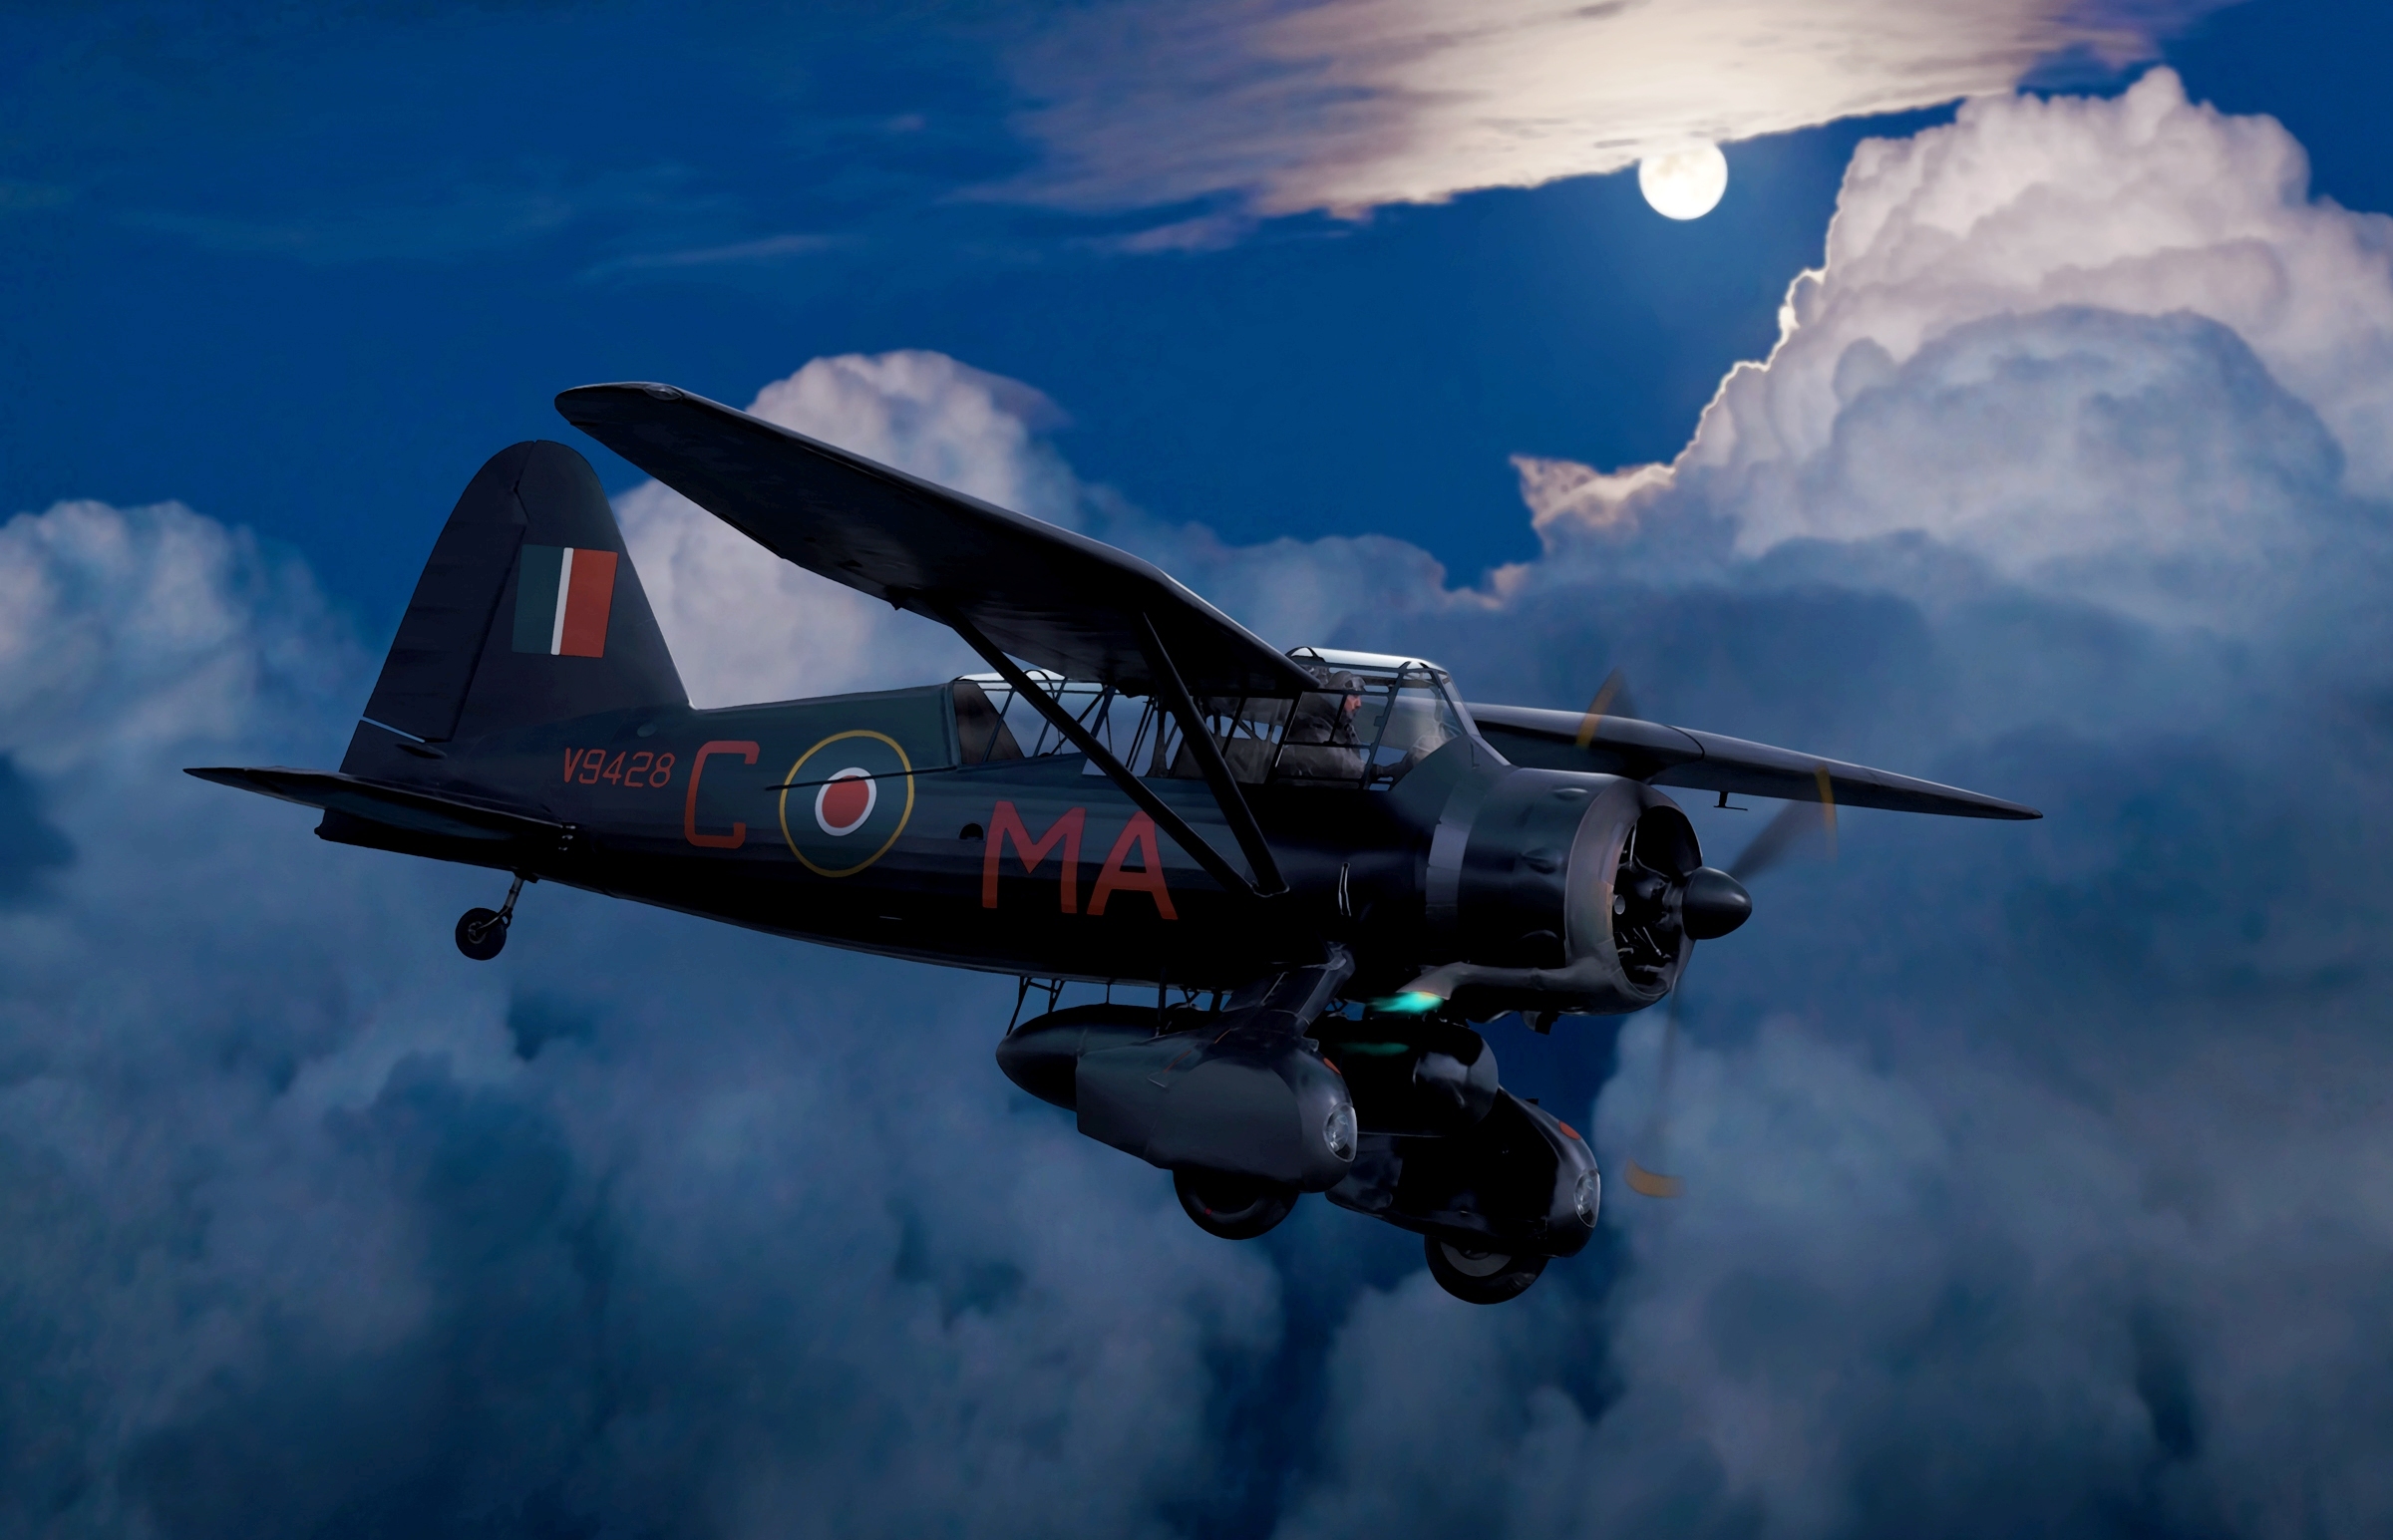 General 2400x1545 World War II military aircraft military airplane aircraft Nightfighter night war Royal Air Force Westland Lysander military vehicle sky vehicle numbers British aircraft